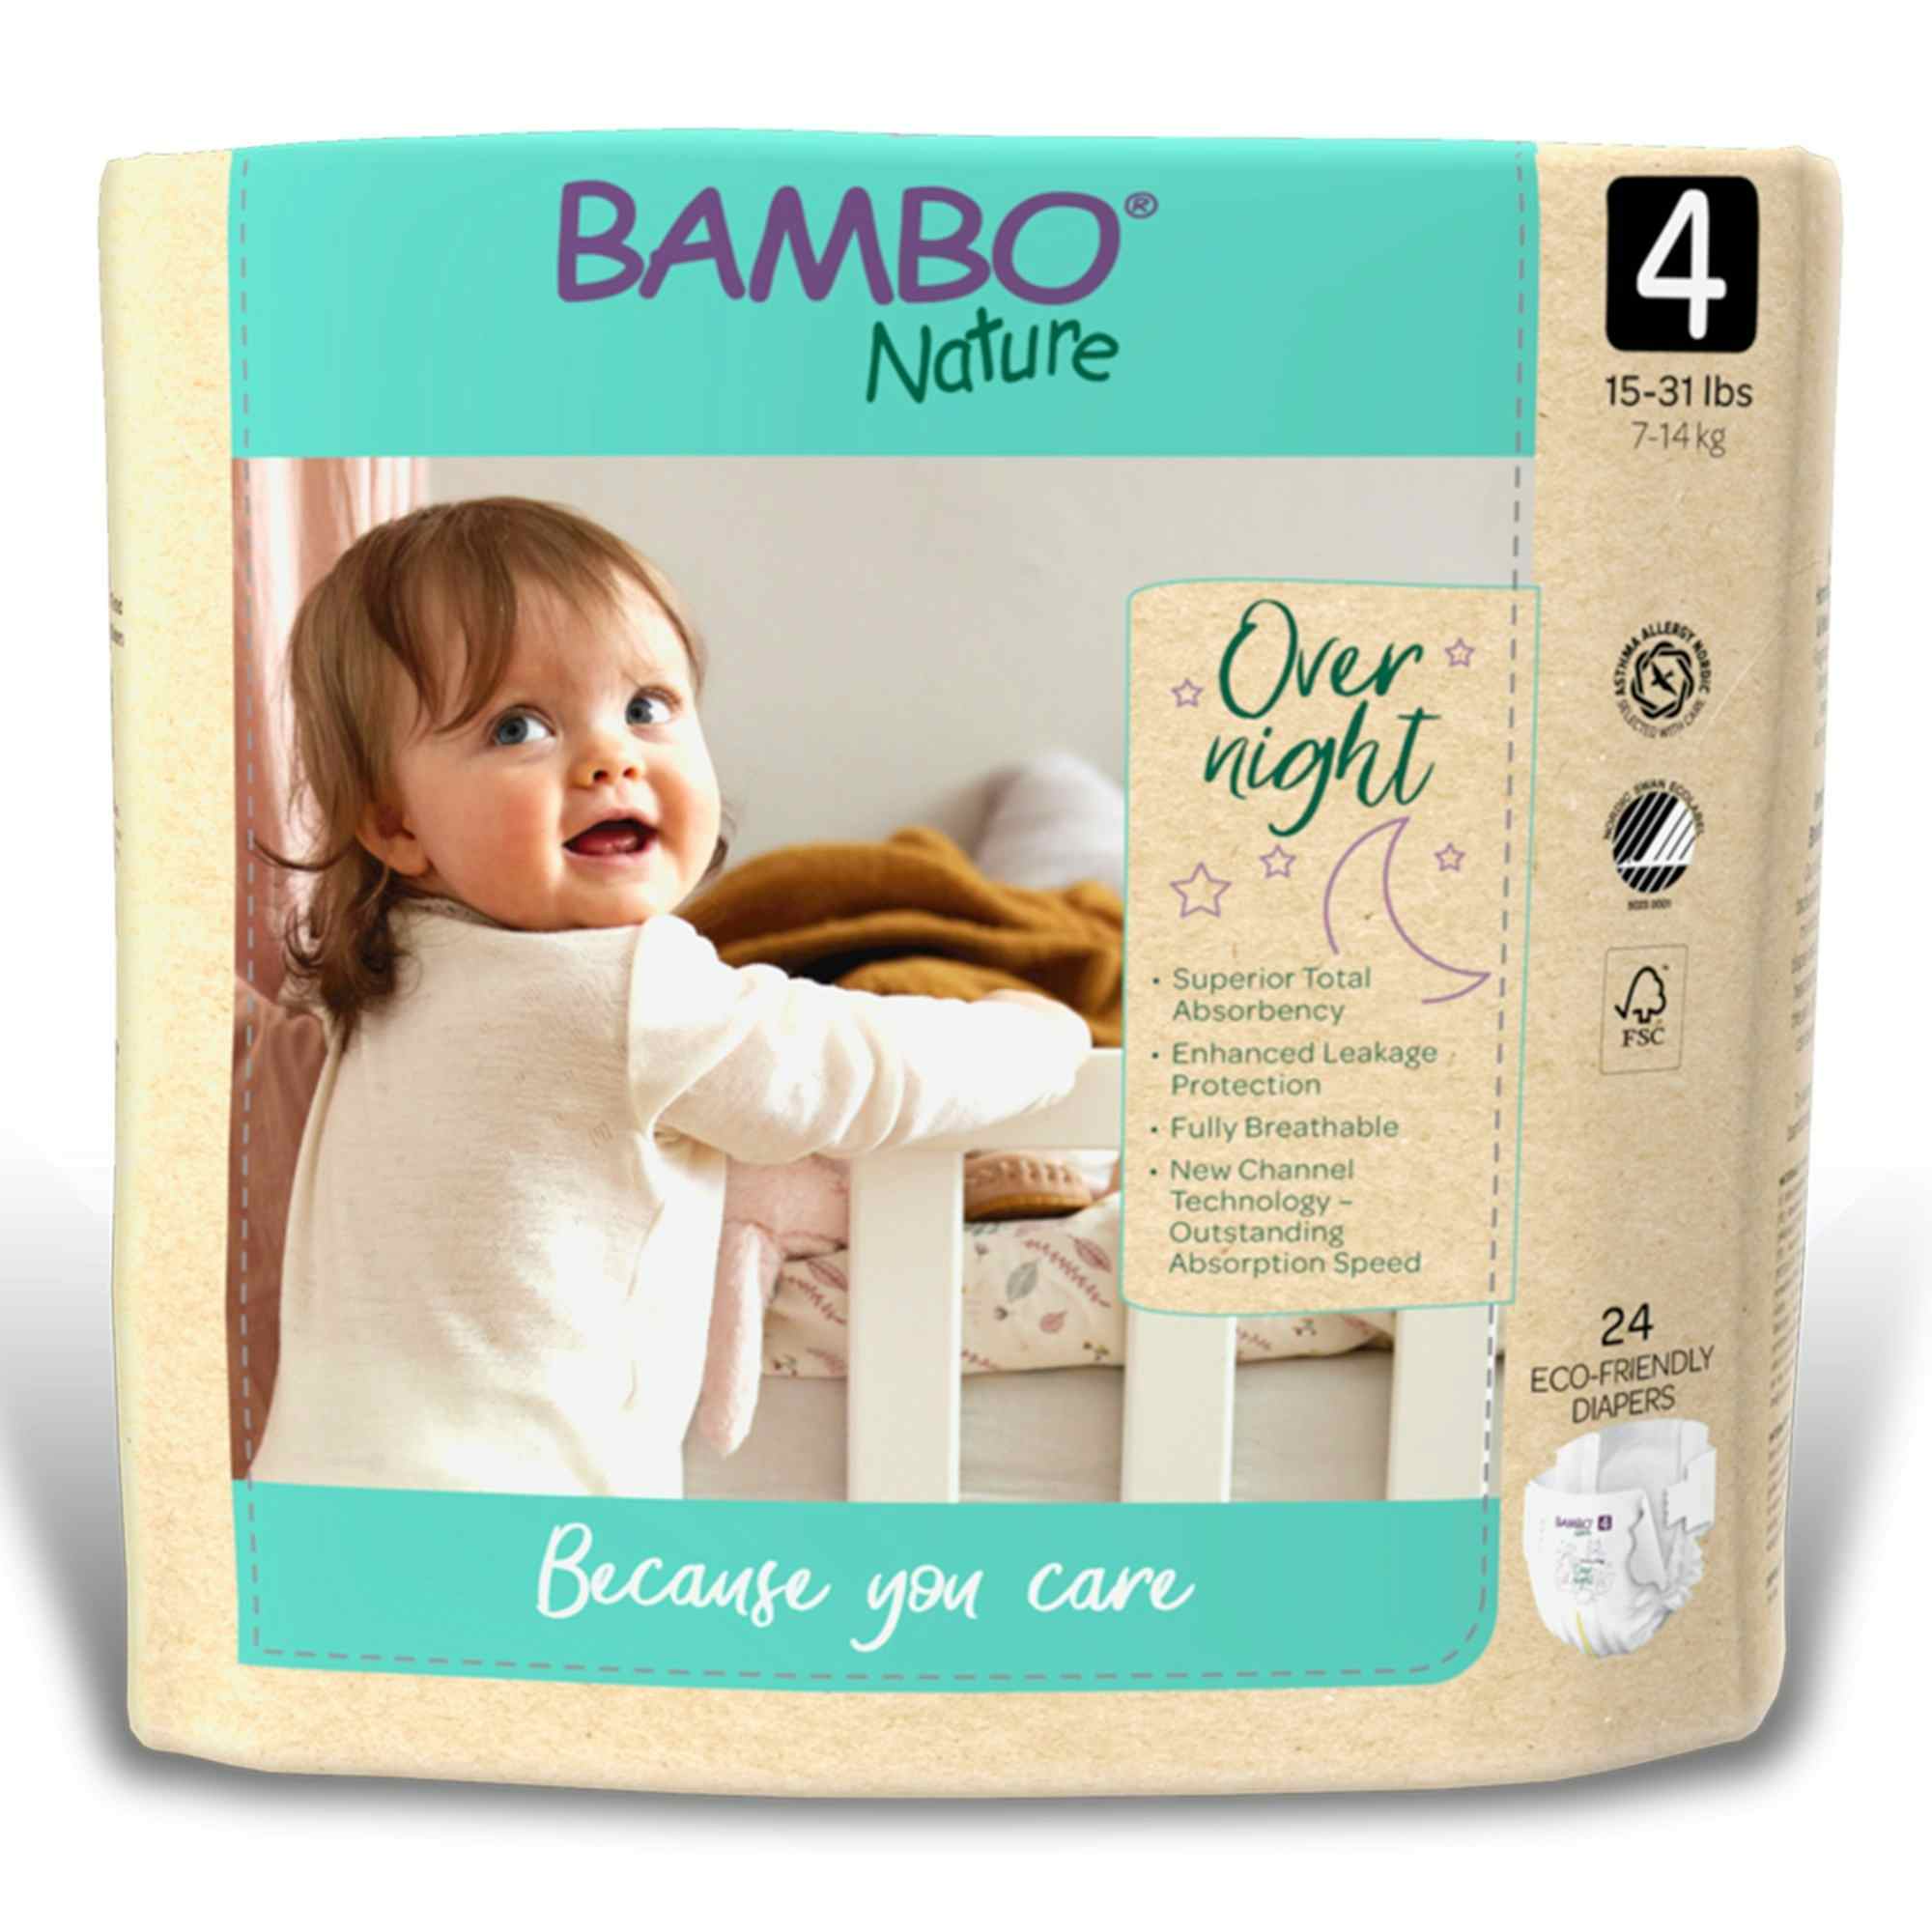 Bambo Nature Overnight Baby Diapers with Tabs, Heavy Absorbency, 1000021010, Size 4 (15 to 31 lbs.) - Case of 96